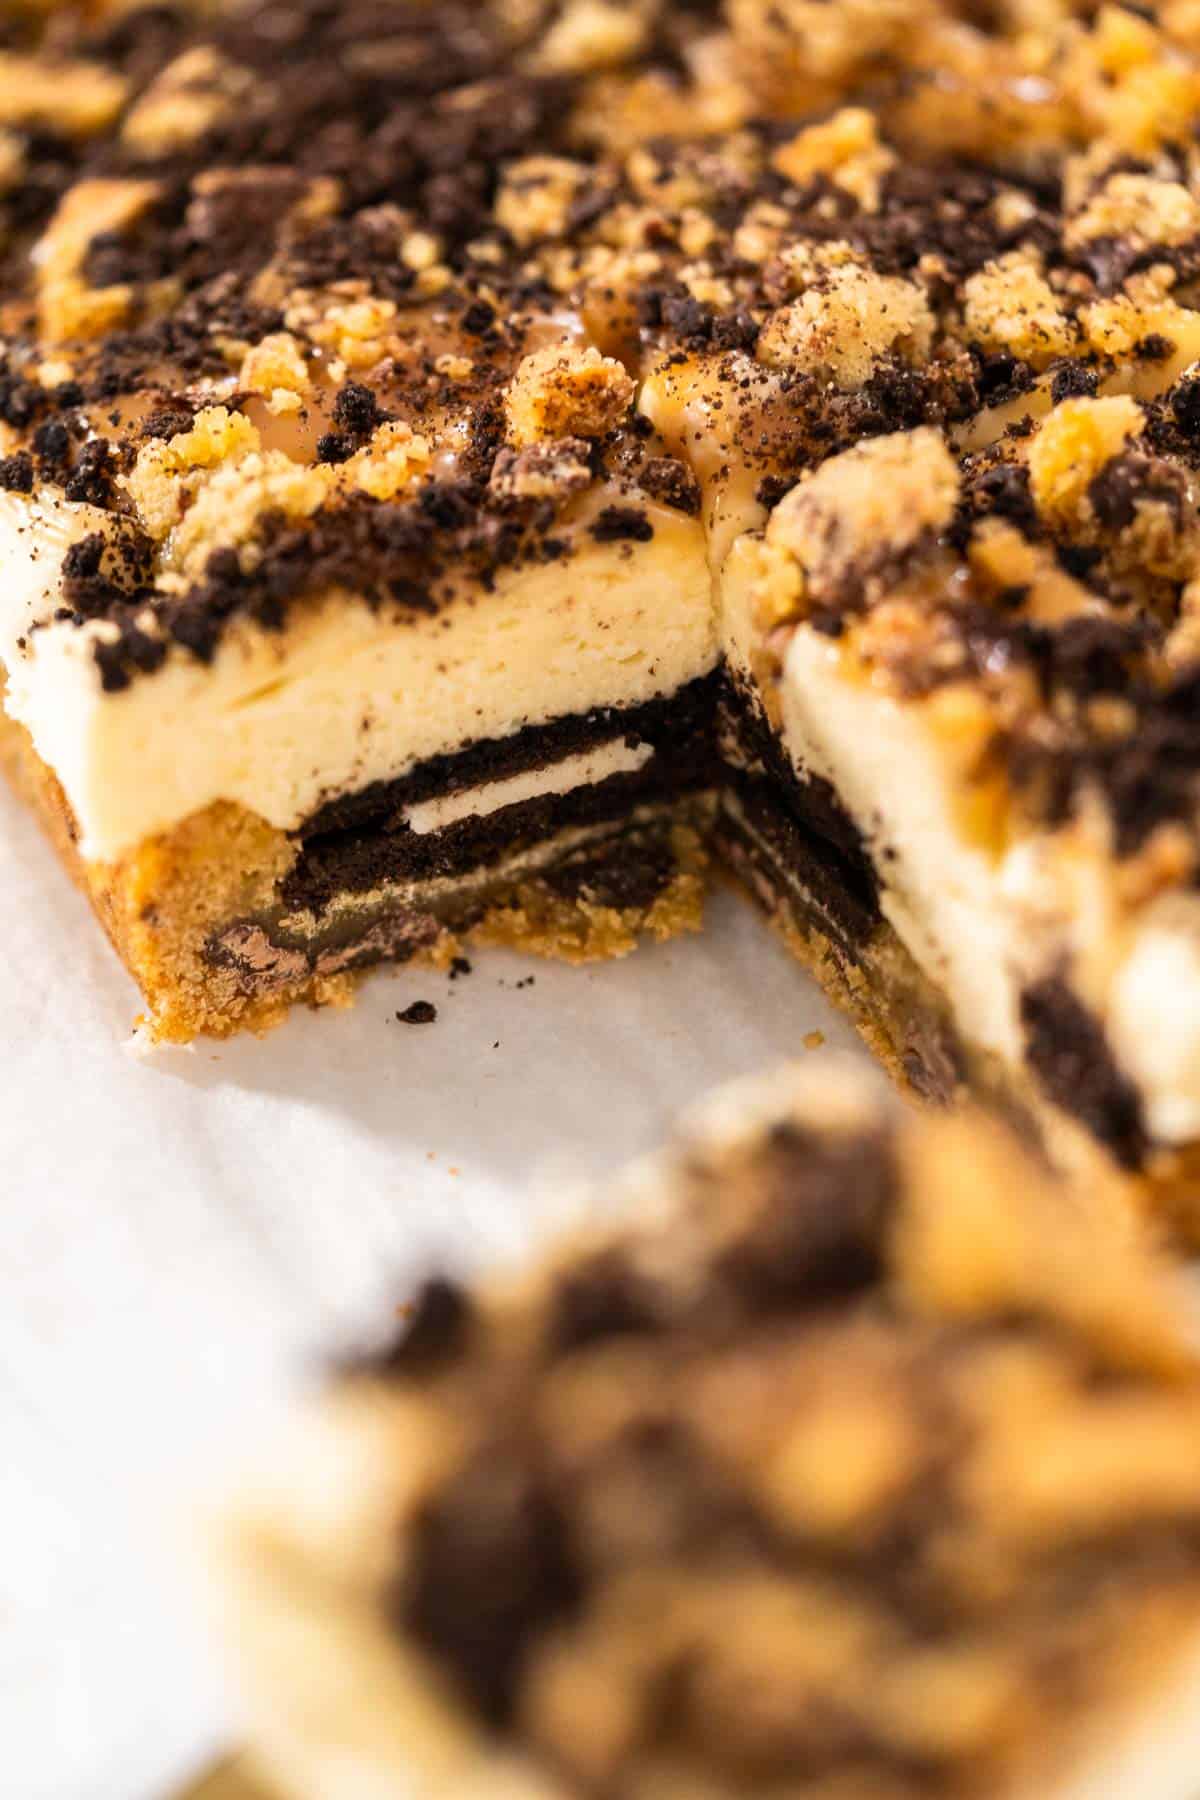 A side view of slutty cheesecake bars to show the layers.